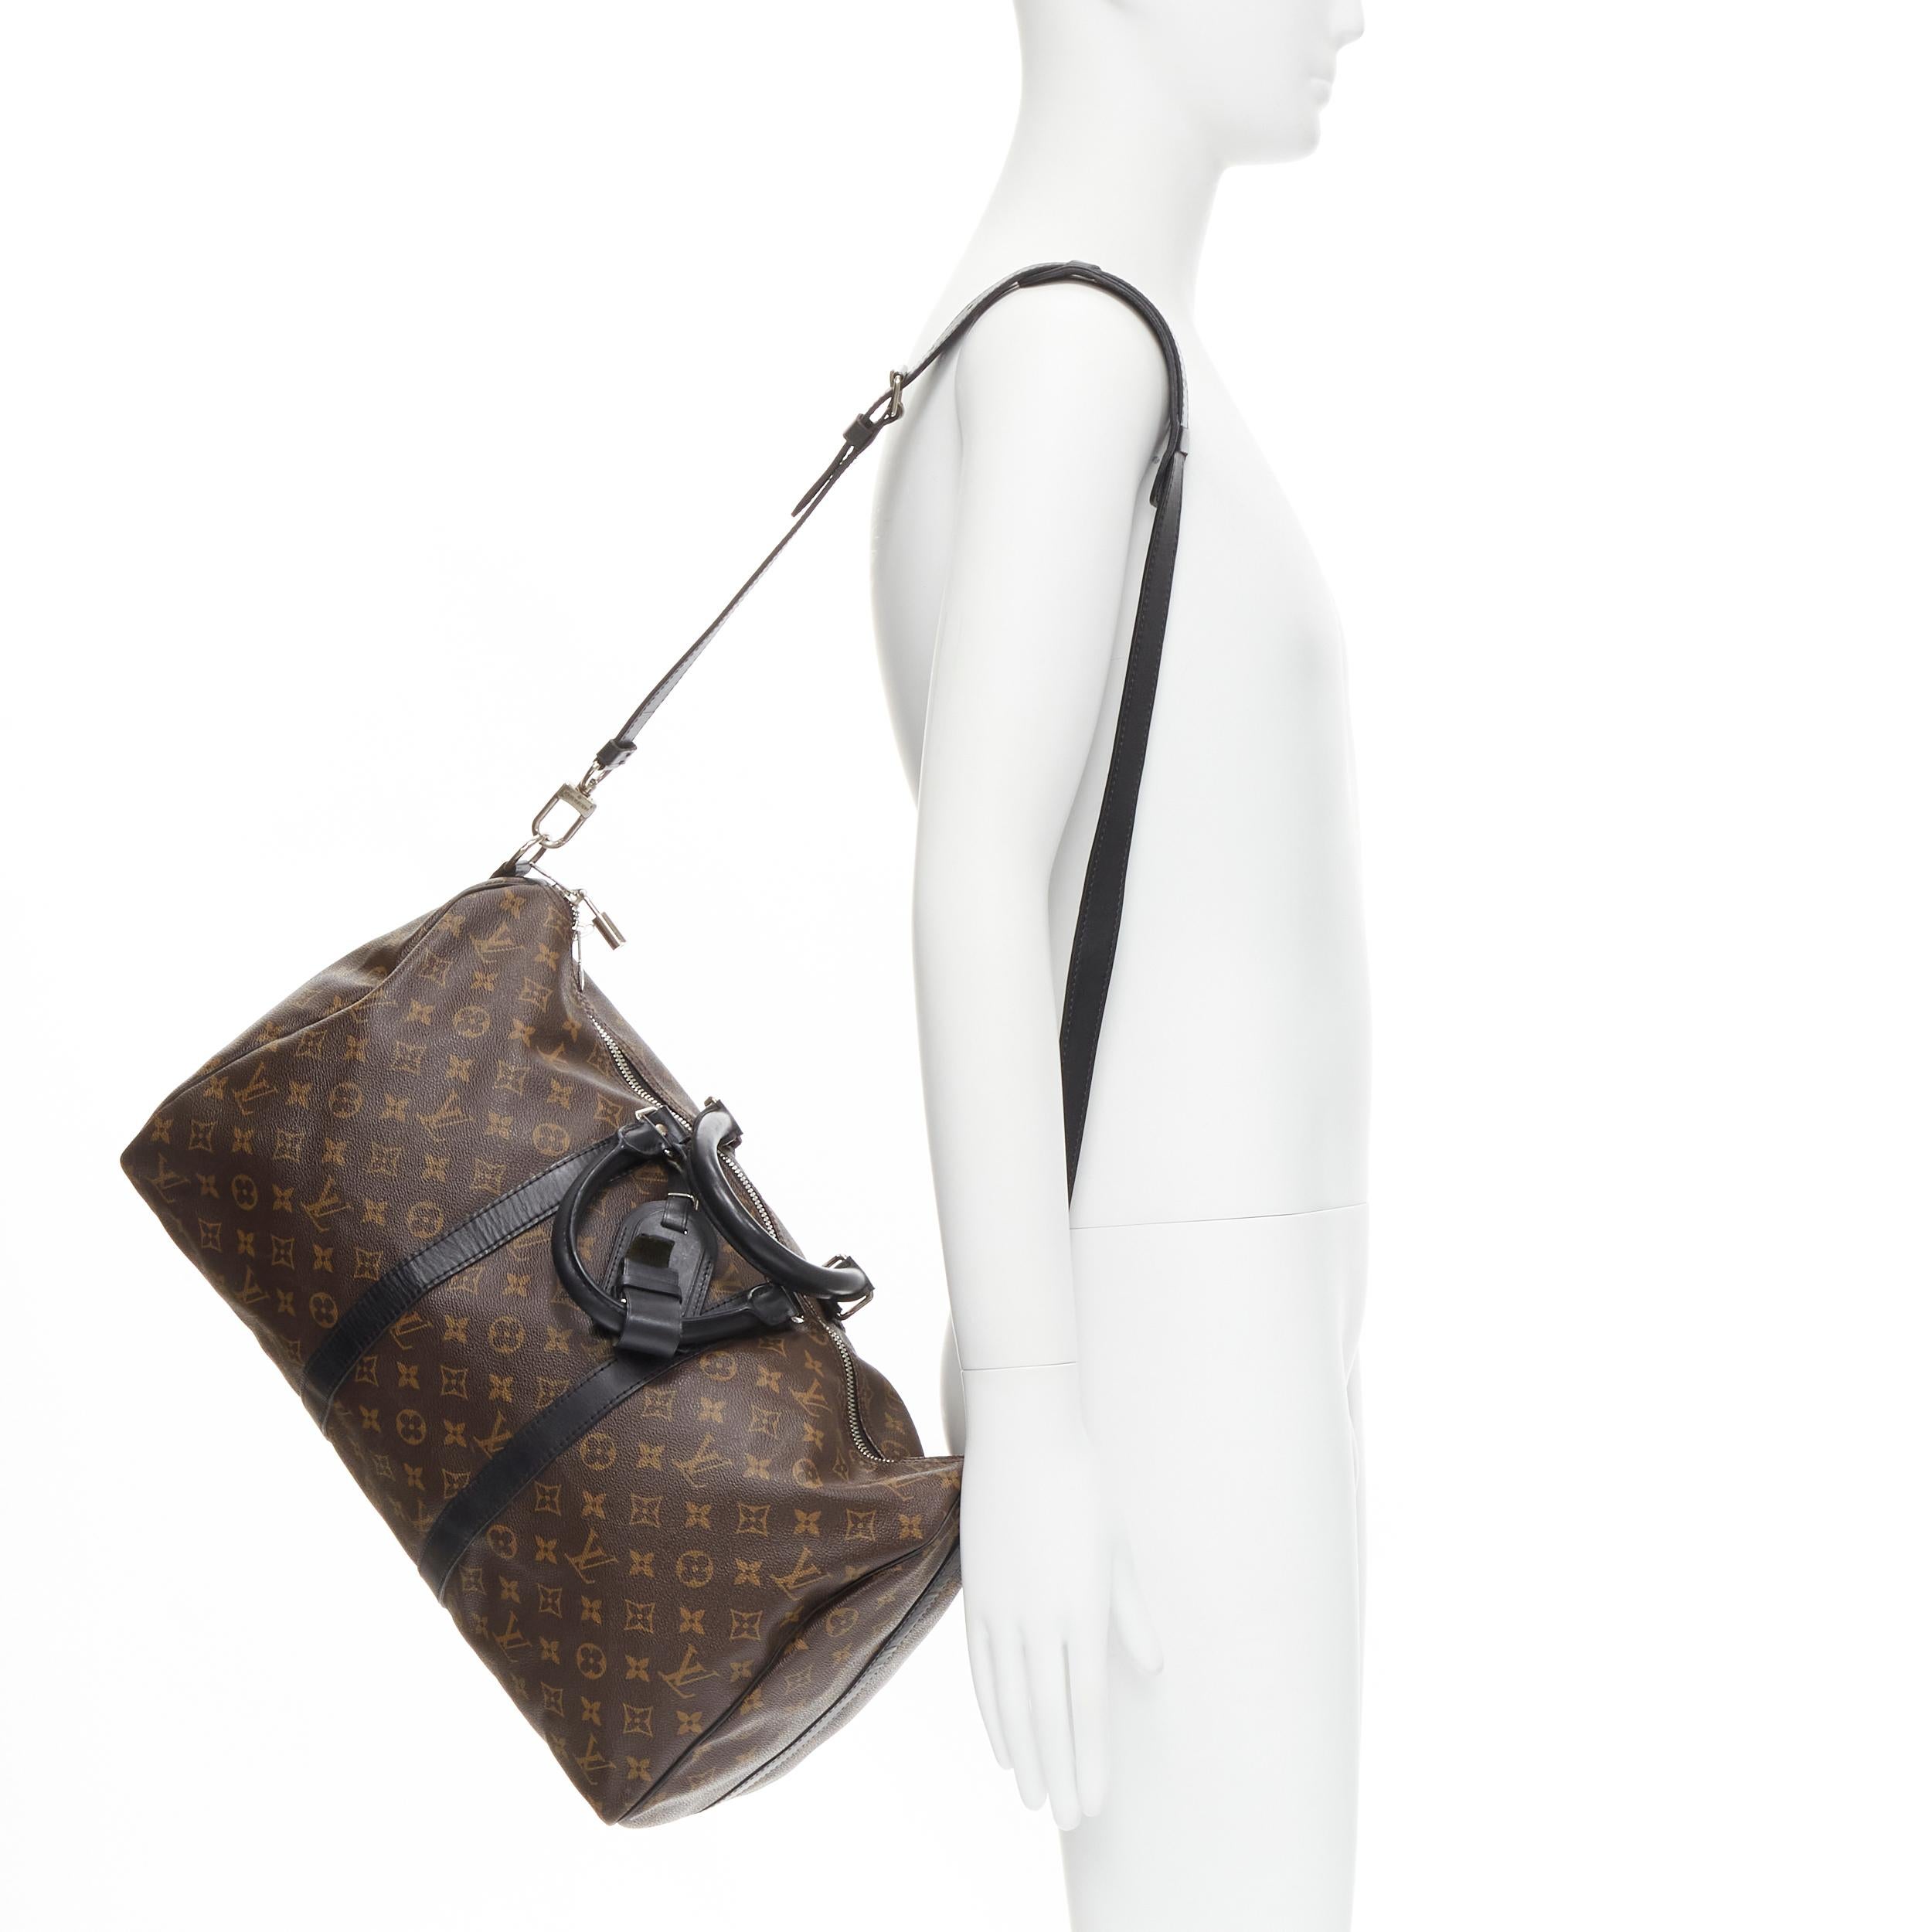 LOUIS VUITTON Keepall Bandouliare 45 Monogram Macassar brown black carryall bag 
Reference: TALI/A00013 
Brand: Louis Vuitton 
Model: Keepall BandouliâˆšÂ®re 45 
Material: Canvas 
Color: Brown 
Pattern: Solid 
Closure: Zip 
Extra Detail: Louis